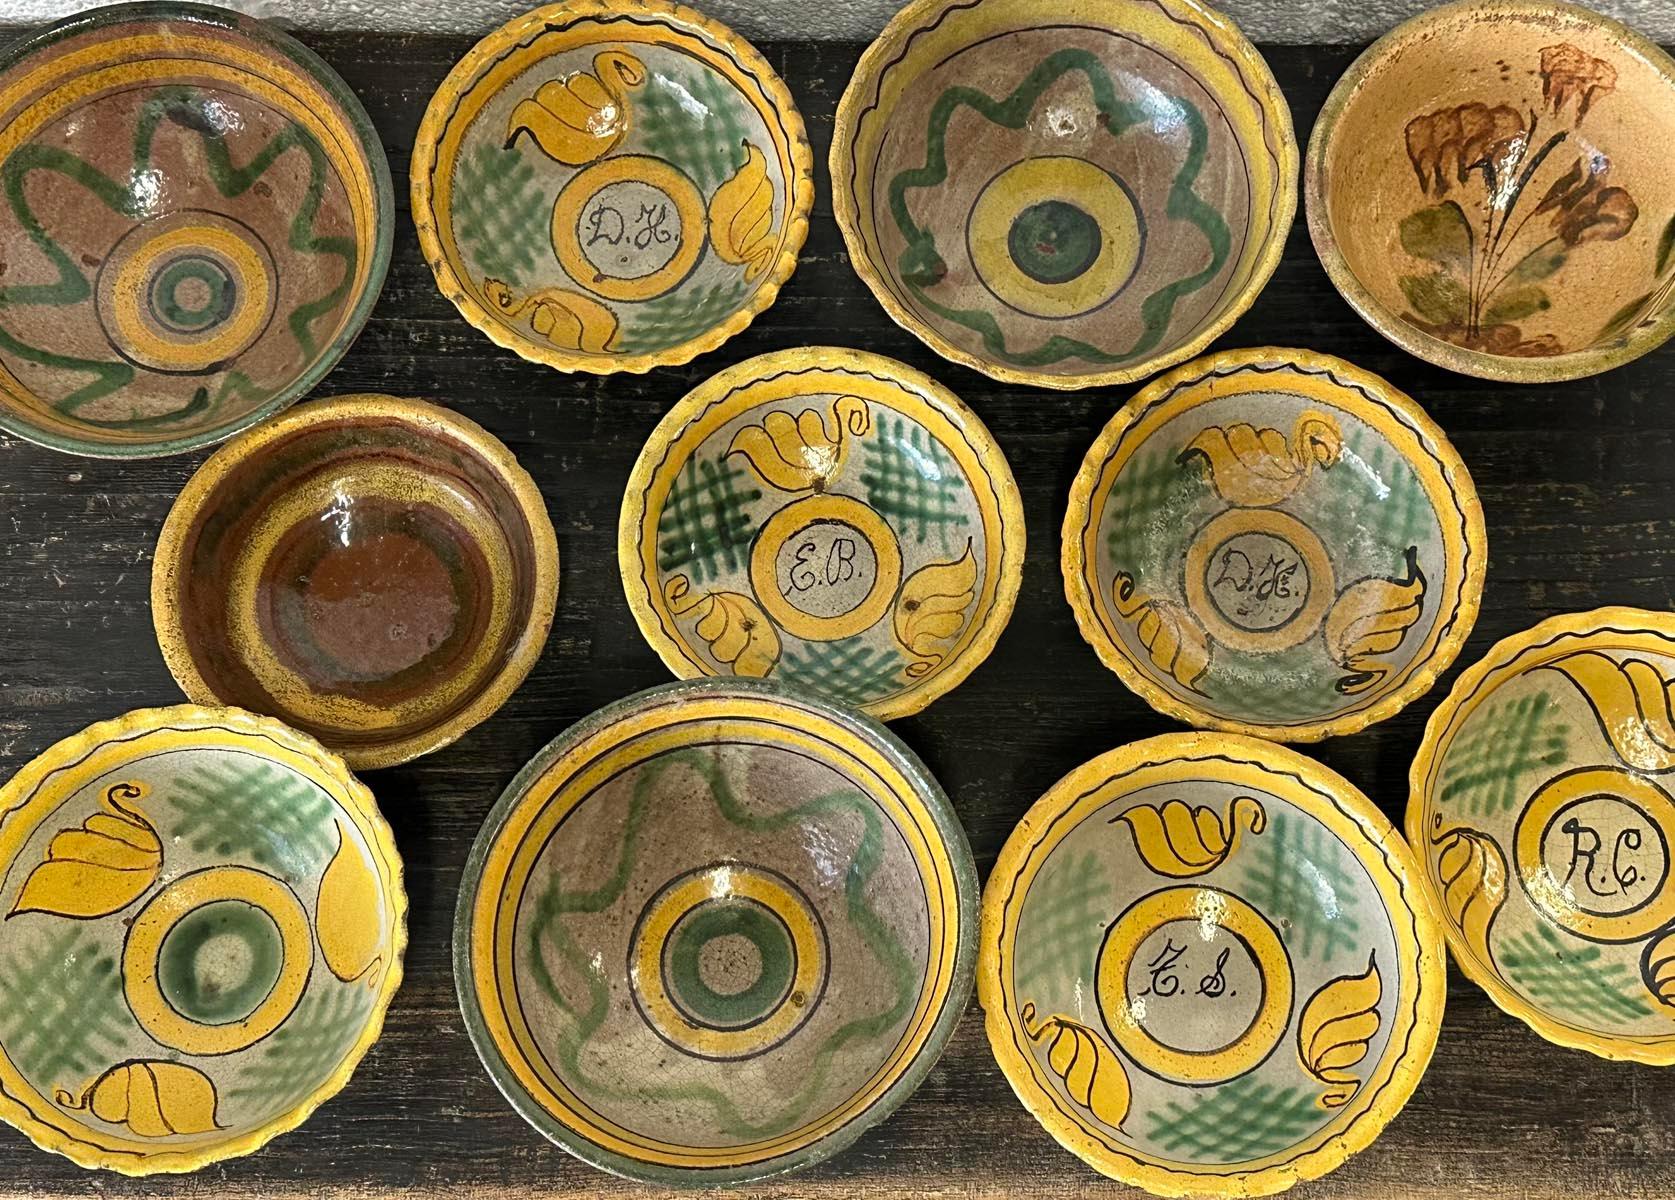 These are sold separately. Please refer to which piece you are interested in at purchase. Early 20th c Majolica bowls from Guatemala. Great colors. Diameter varies from about 5.5 inches to 7 inches